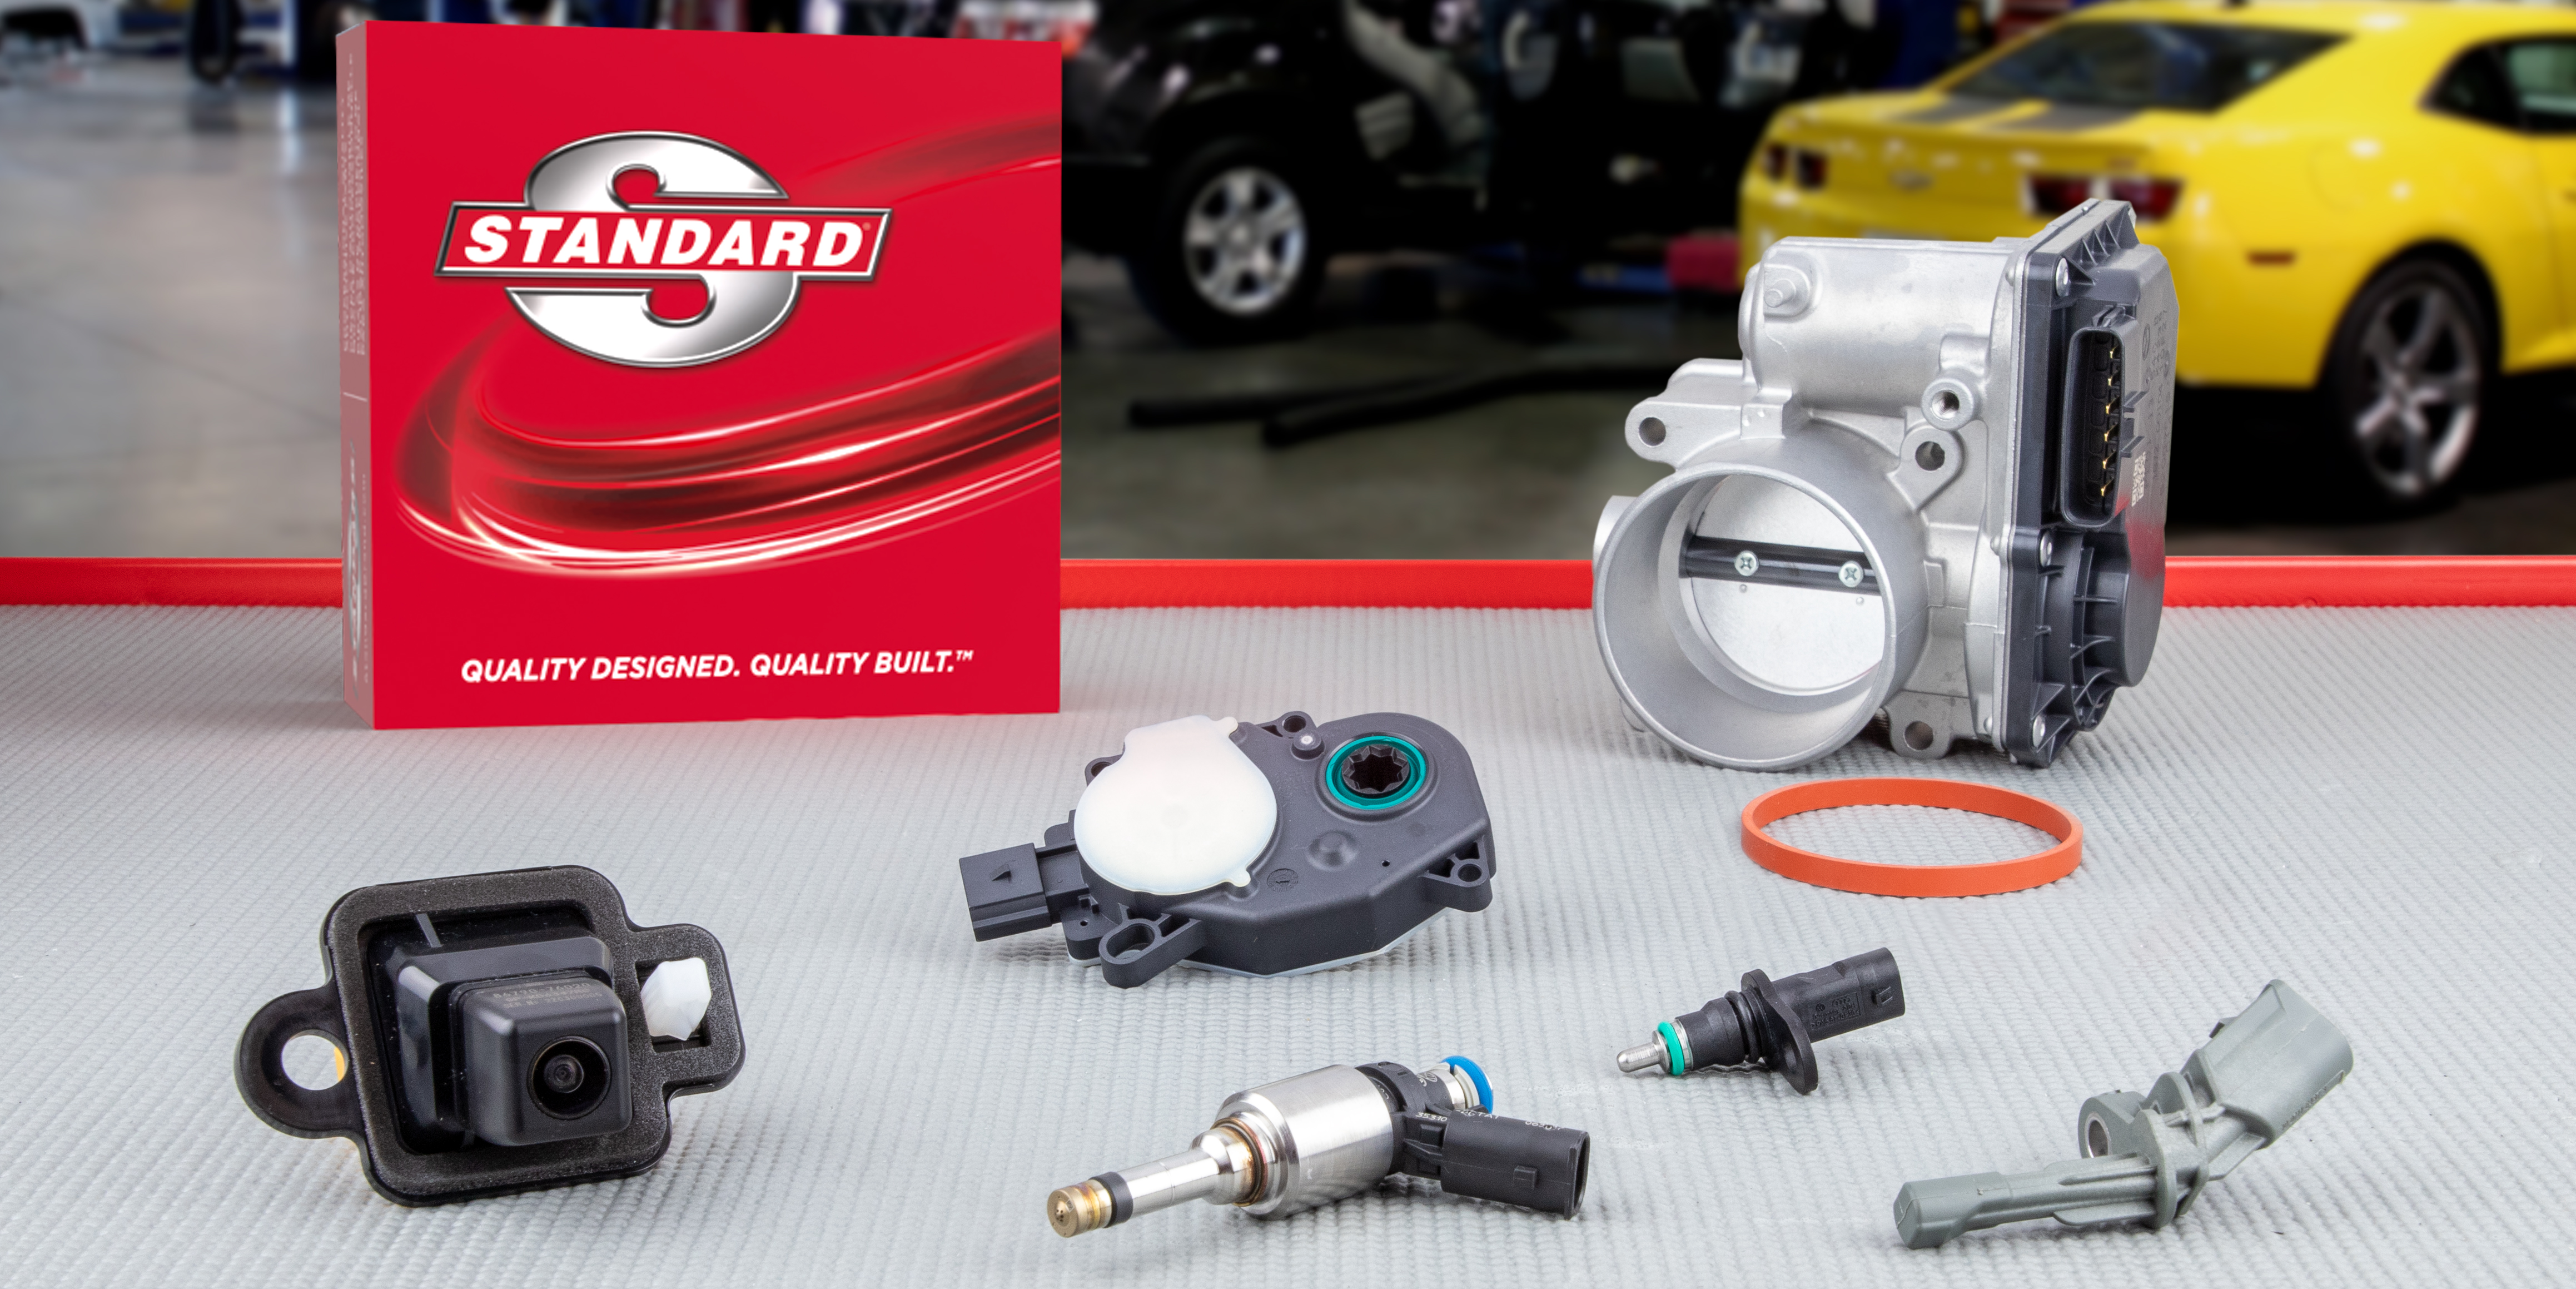 Standard Motor Products’ May Release Includes 222 New Part Numbers